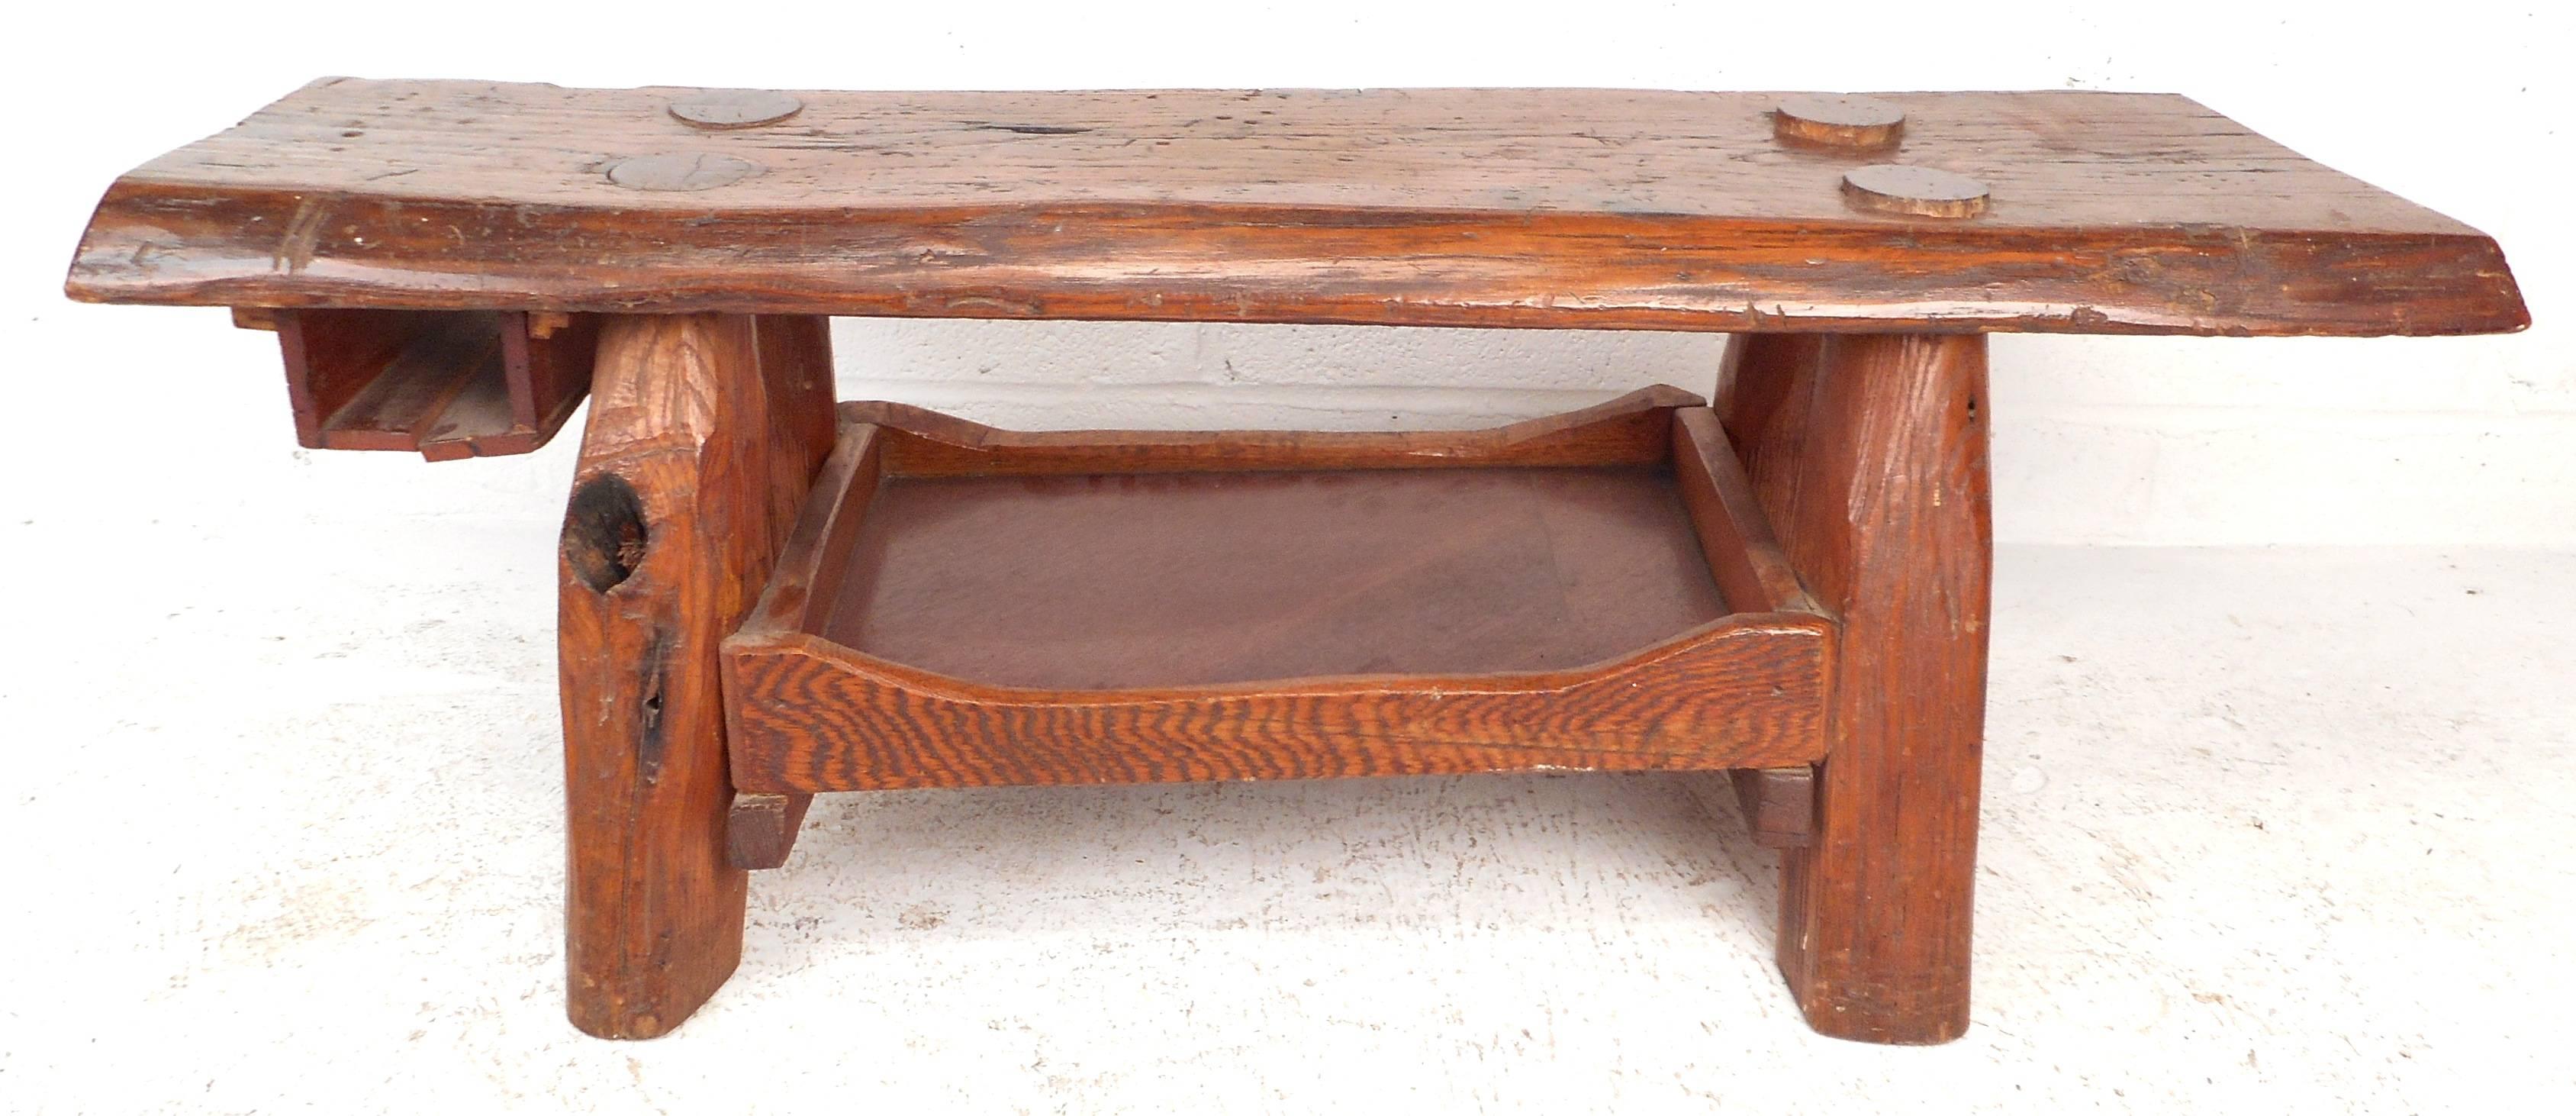 Unique rustic vintage cobbler's bench features a thick tree slab mounted on splayed legs with convenient storage underneath. Stylish look and versatile deign make this a unique piece for use as a coffee table or bench in any interior. Please confirm